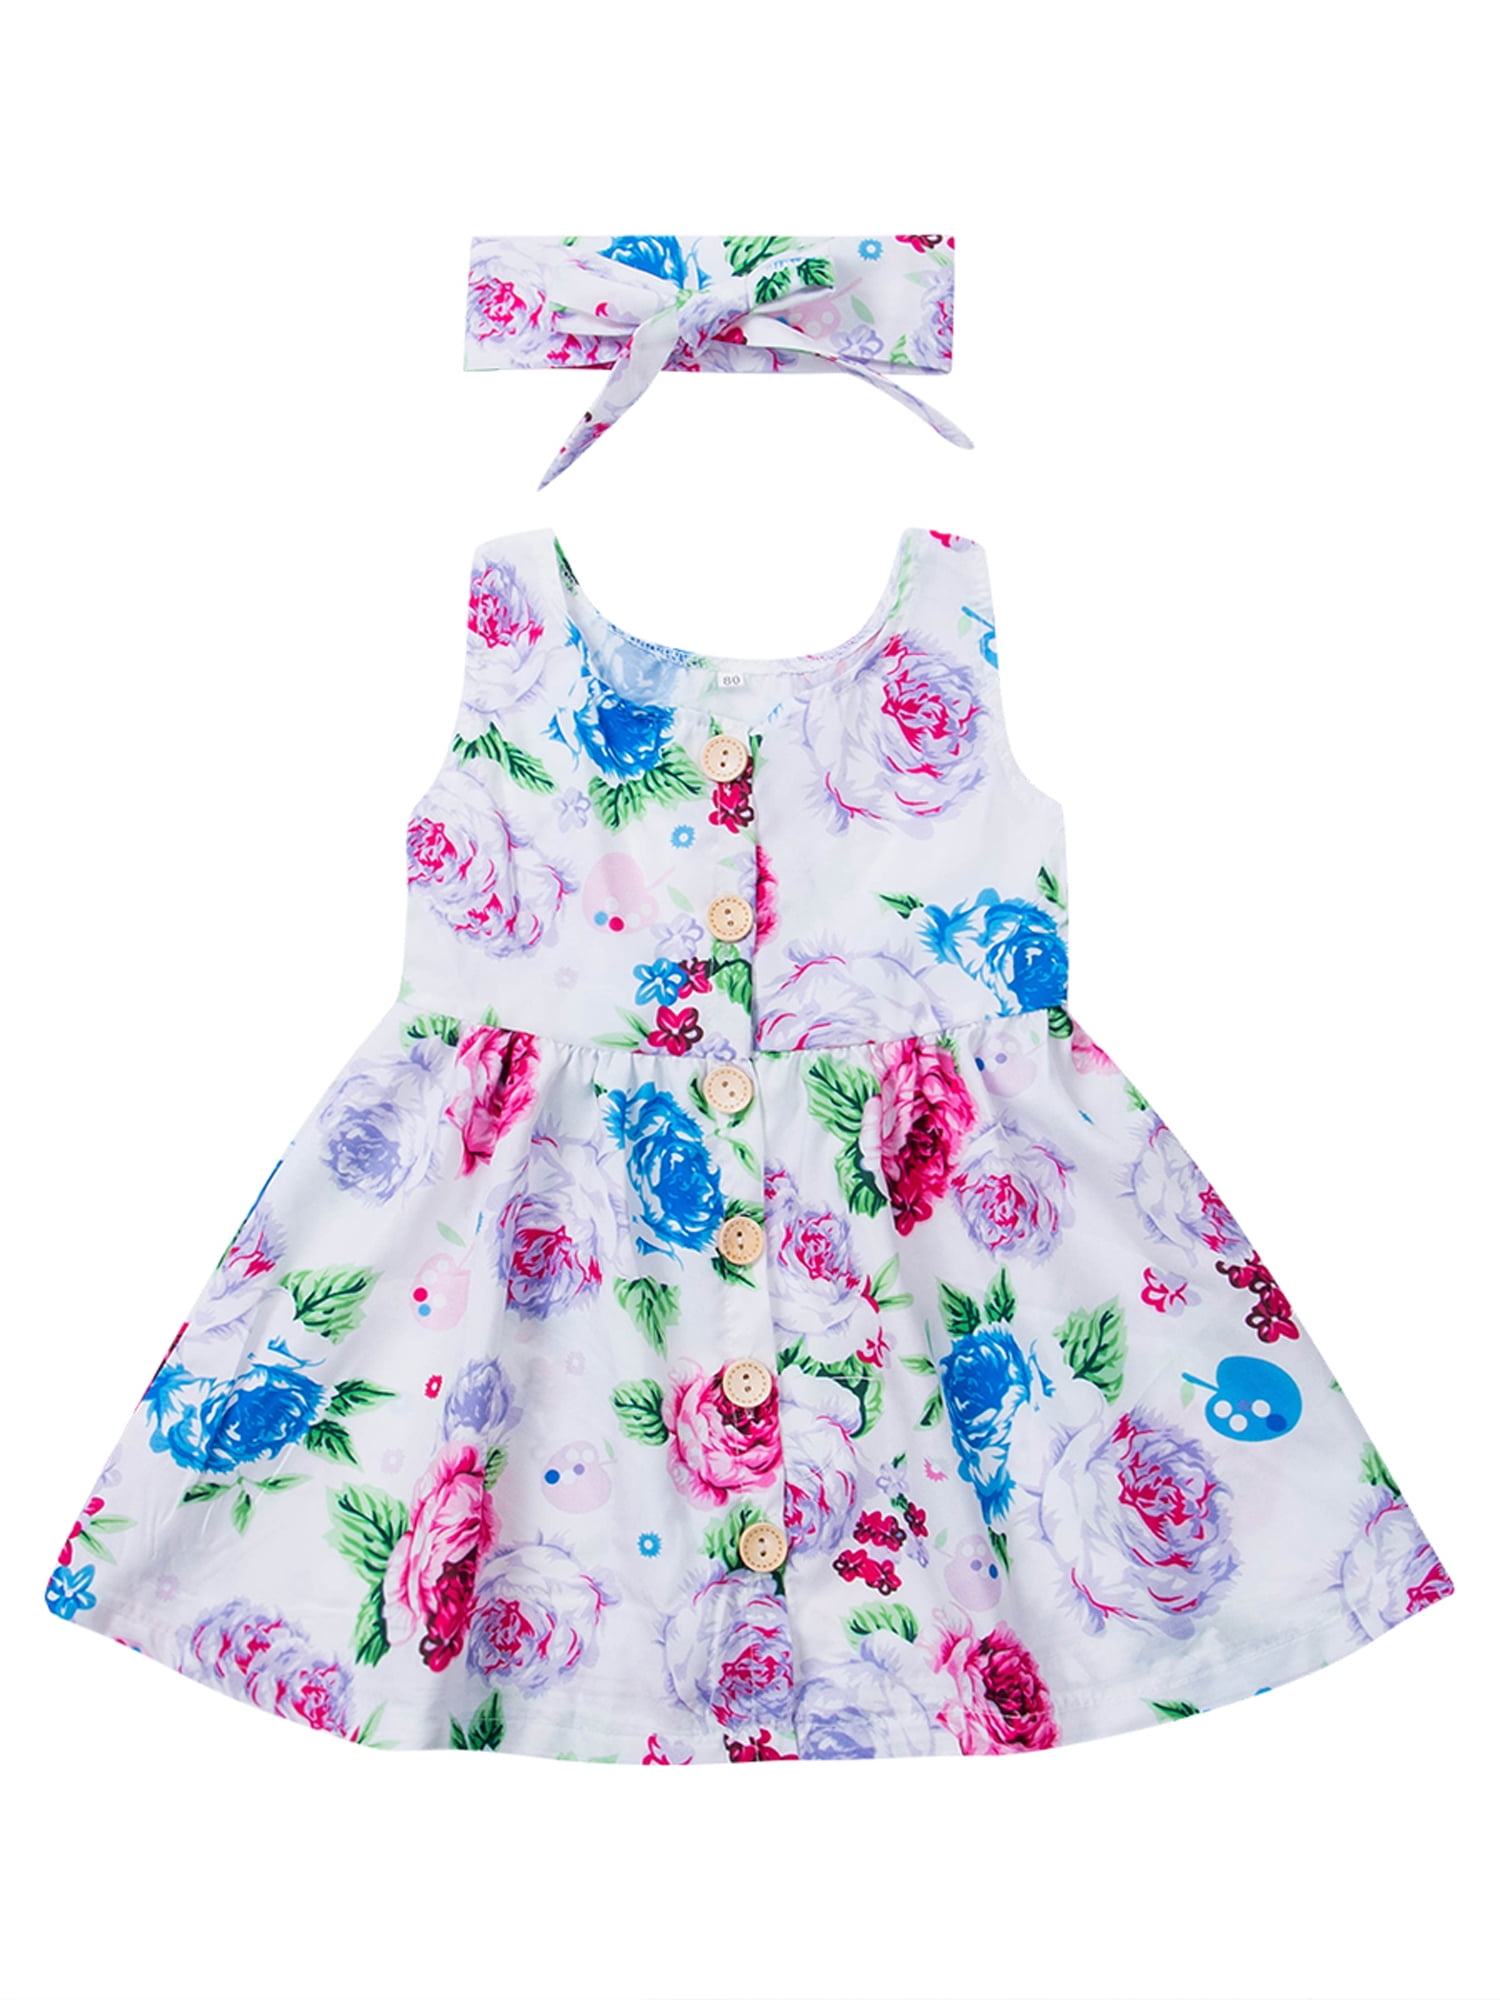 Girls Cotton Summer Dress Kids Sleeveless Party Dresses New Age 2-10 Years 